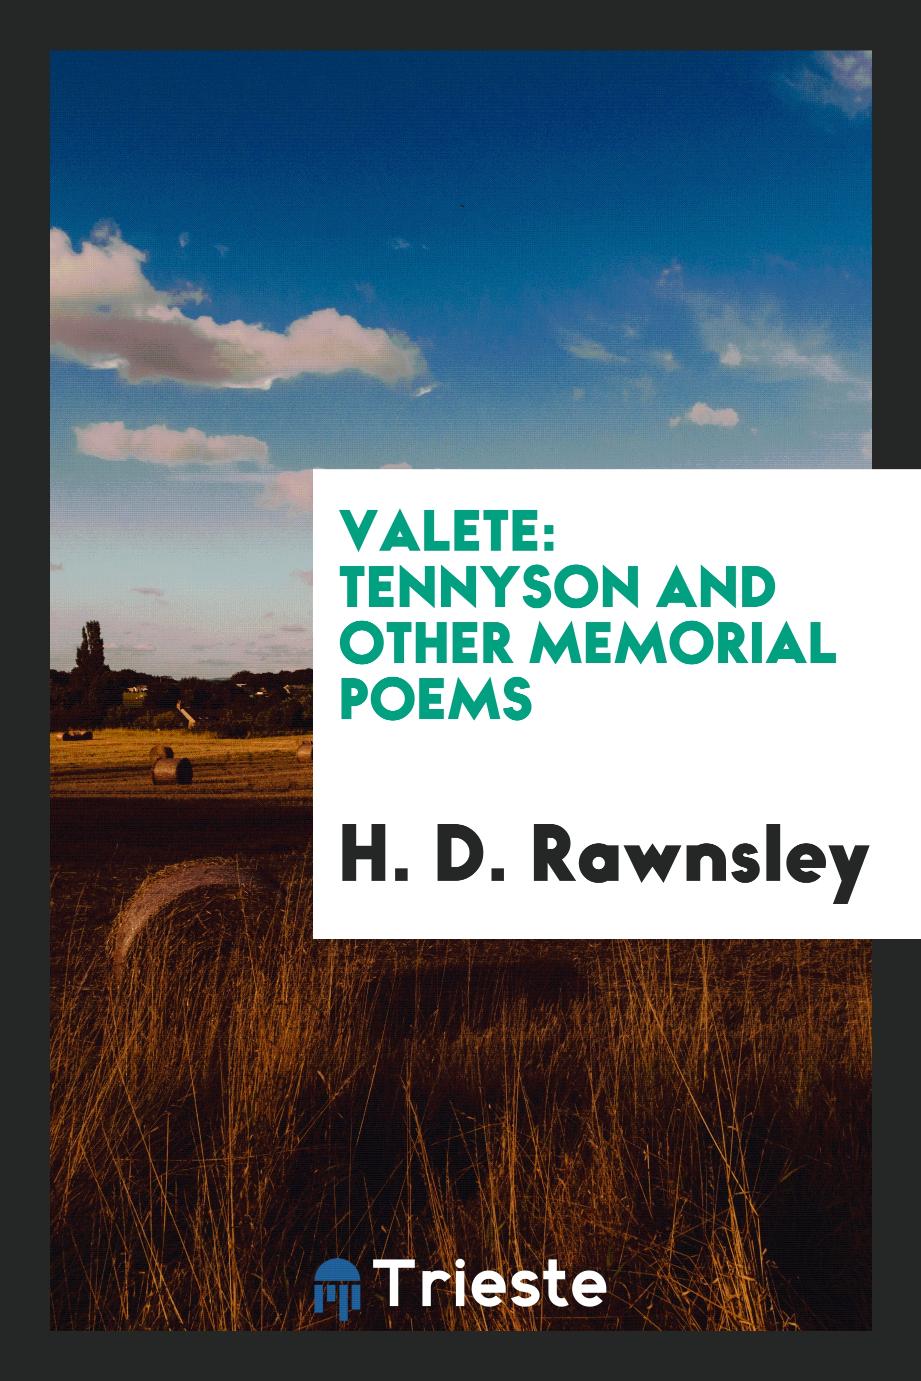 Valete: Tennyson and other memorial poems